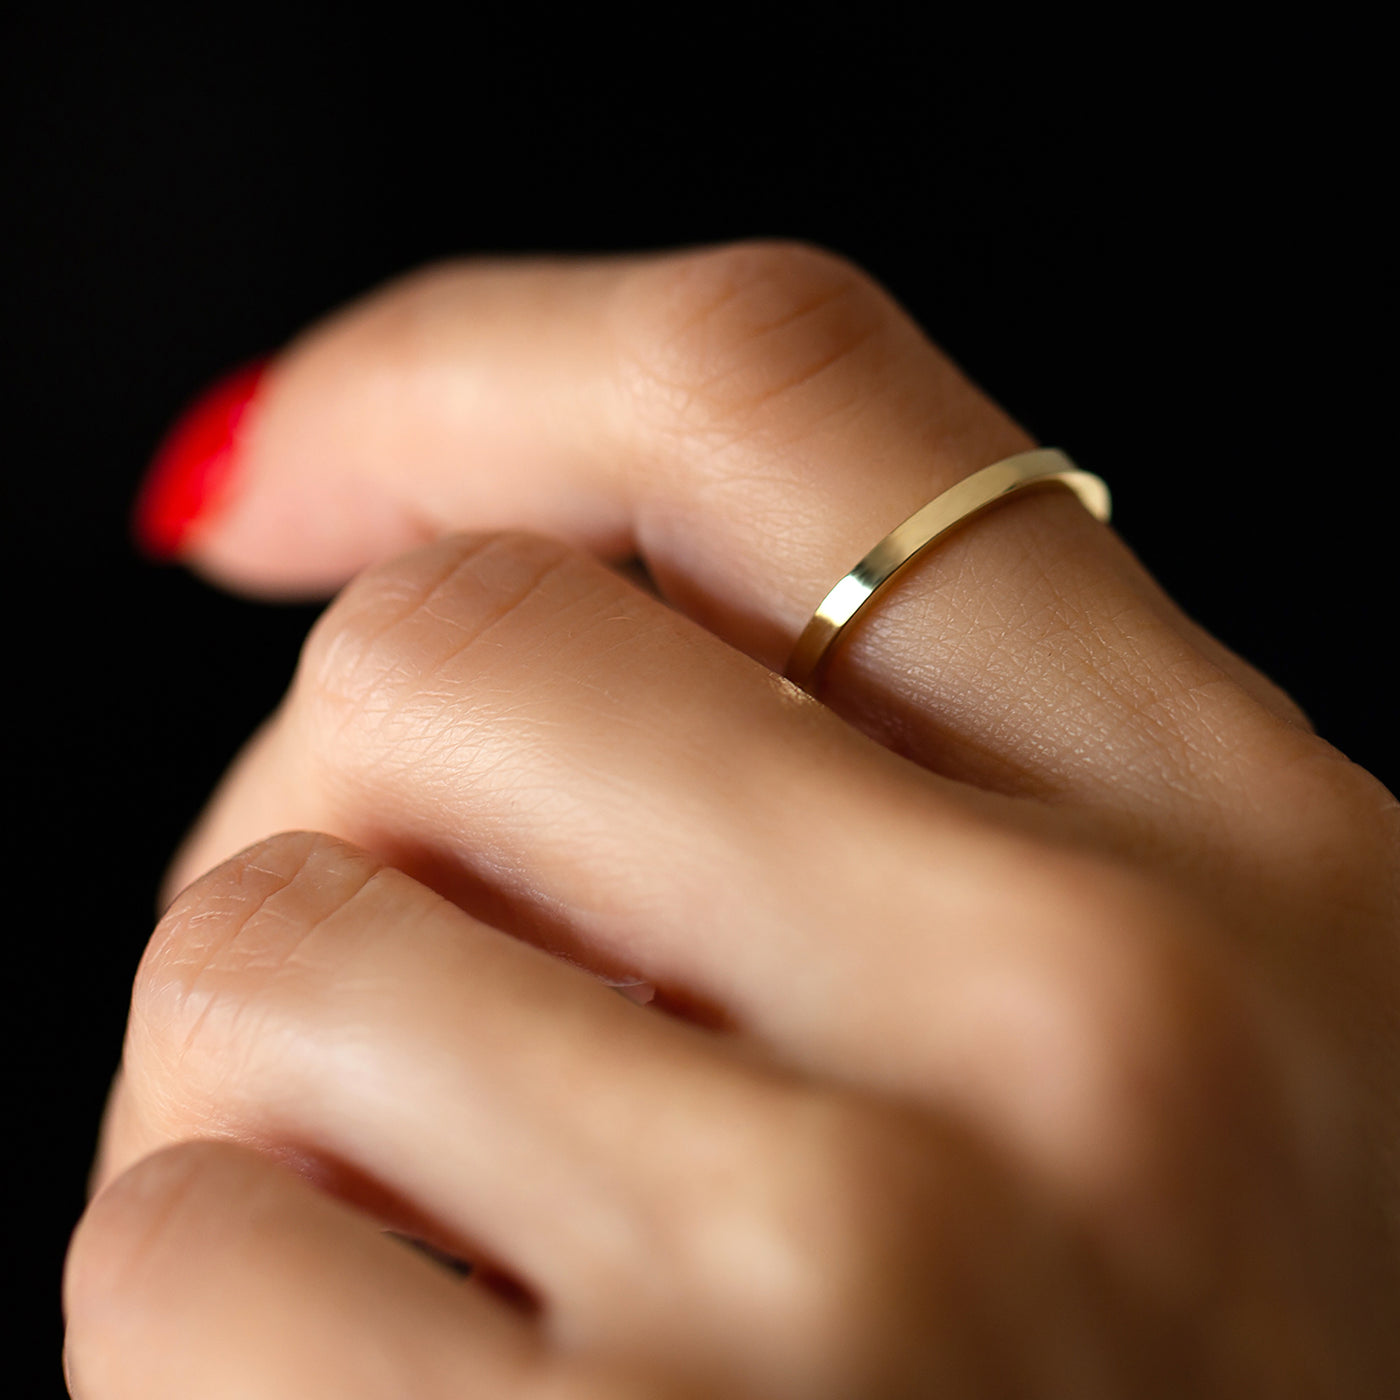 This is a dainty 14k wedding ring, the perfect 2mm classic wedding band, made of 14K/18K solid gold, a beautifully simple and thin wedding band.